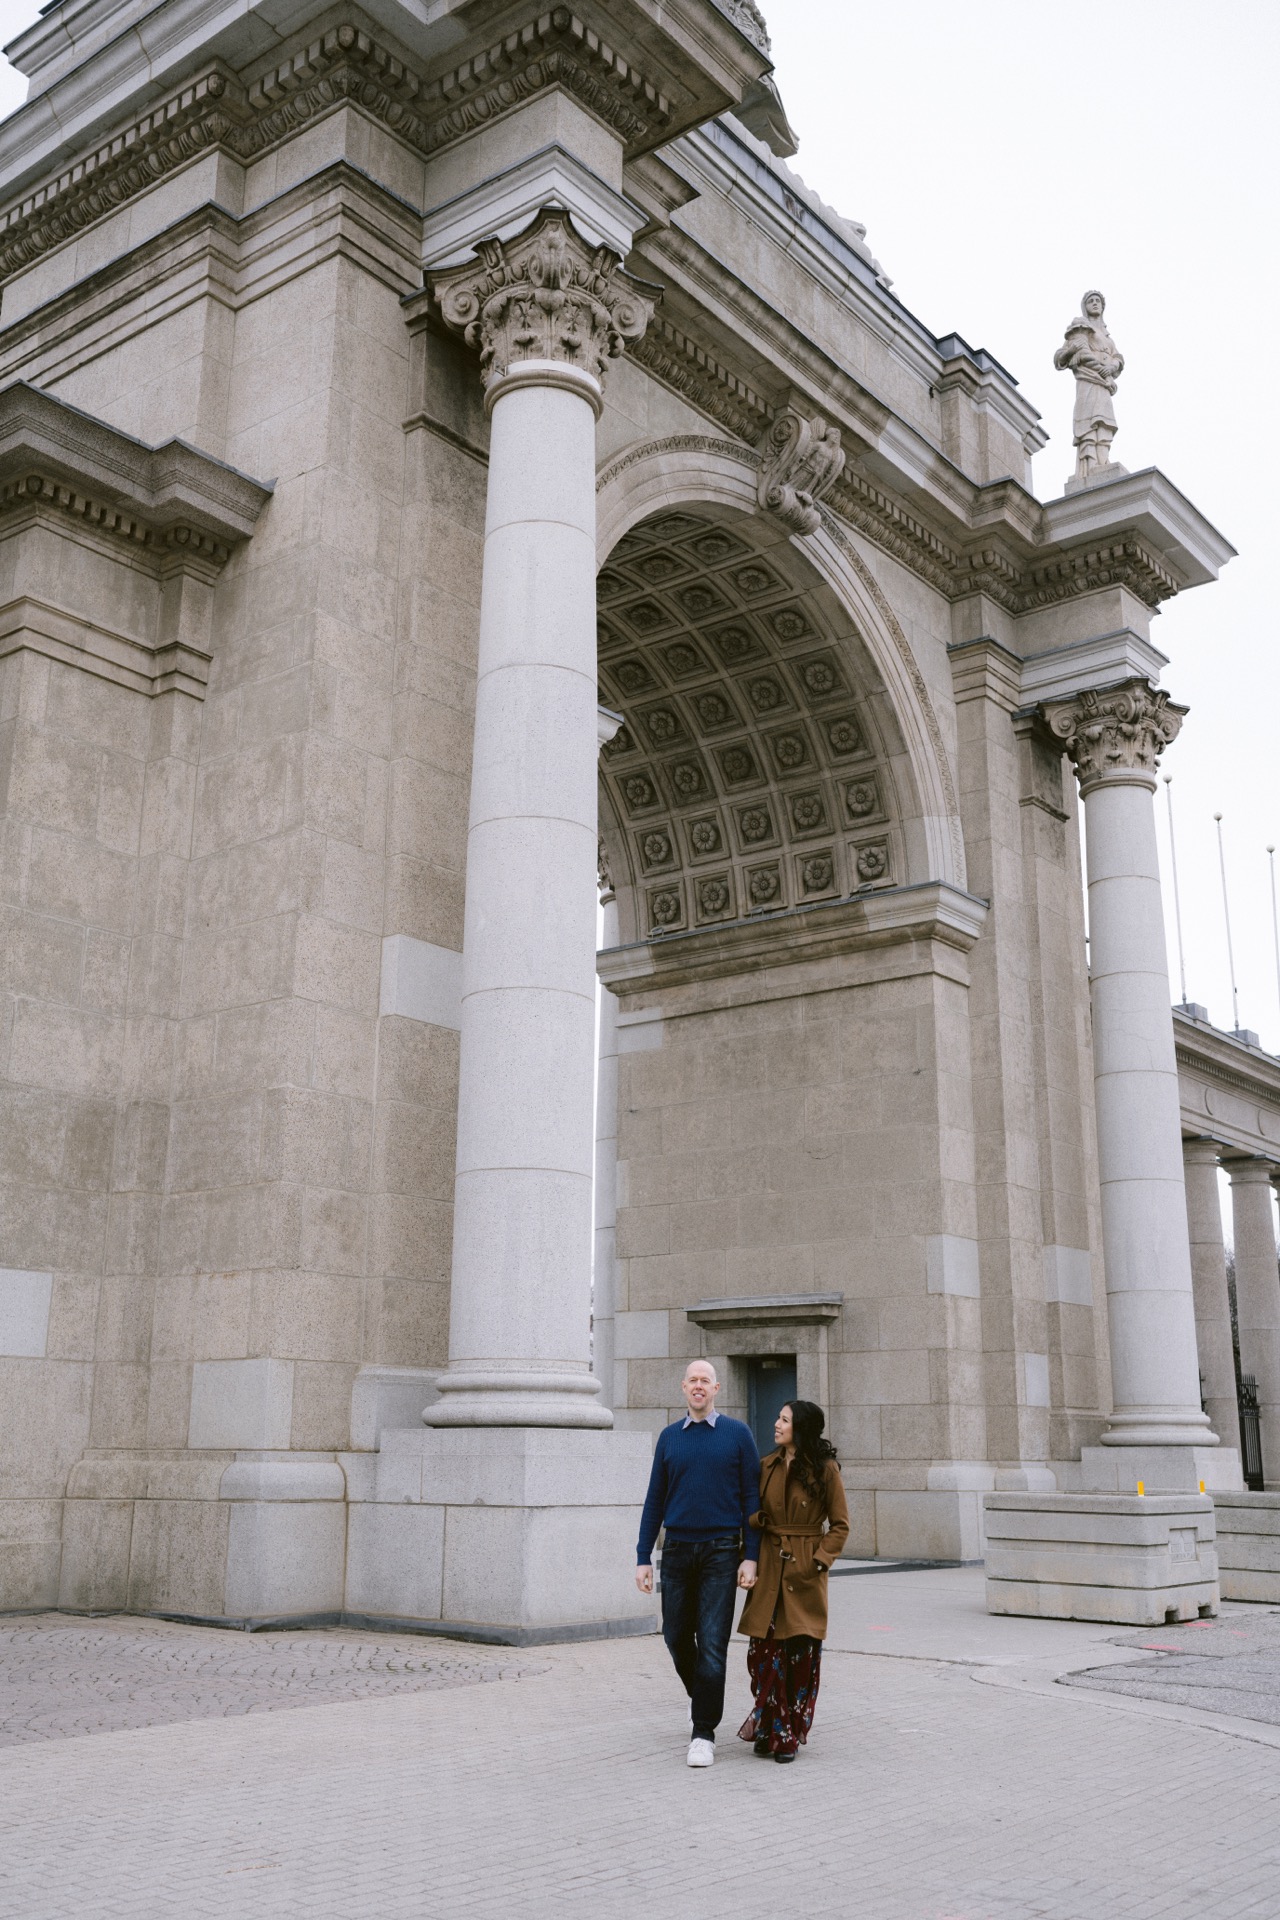 Two individuals walking by a grand neoclassical archway.